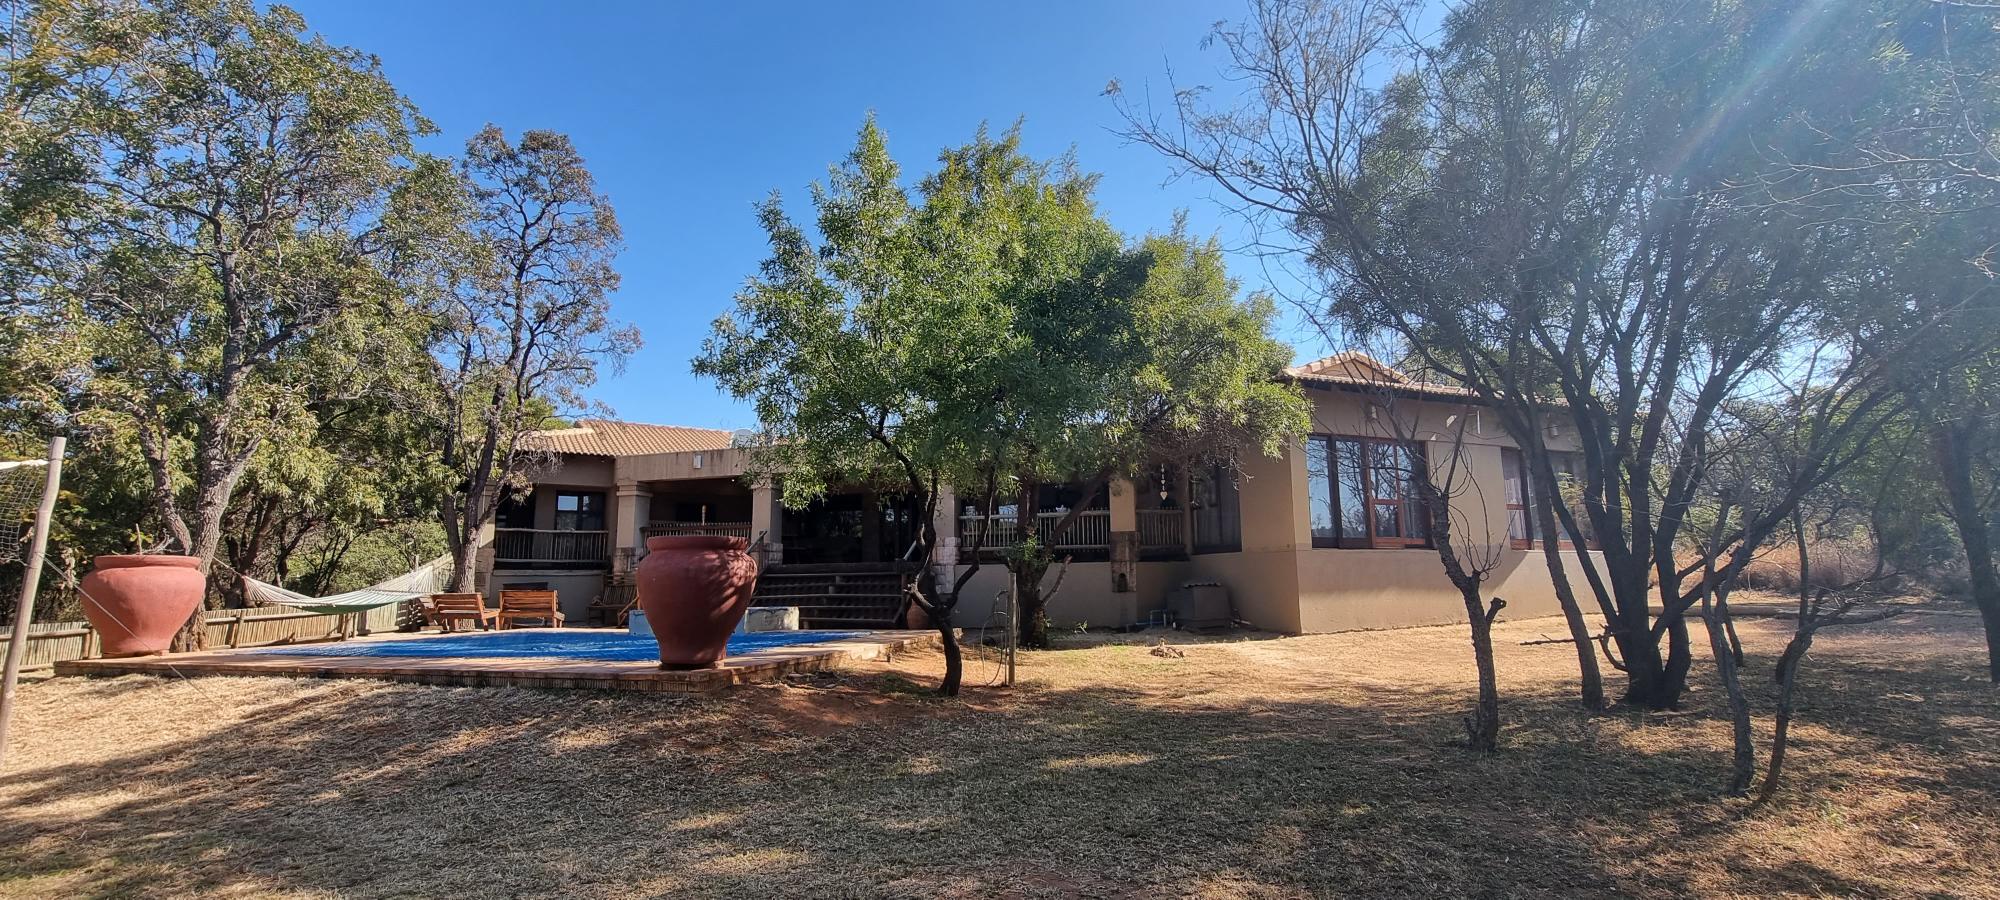 5 Bedroom Property for Sale in Elements Private Golf Reserve Limpopo